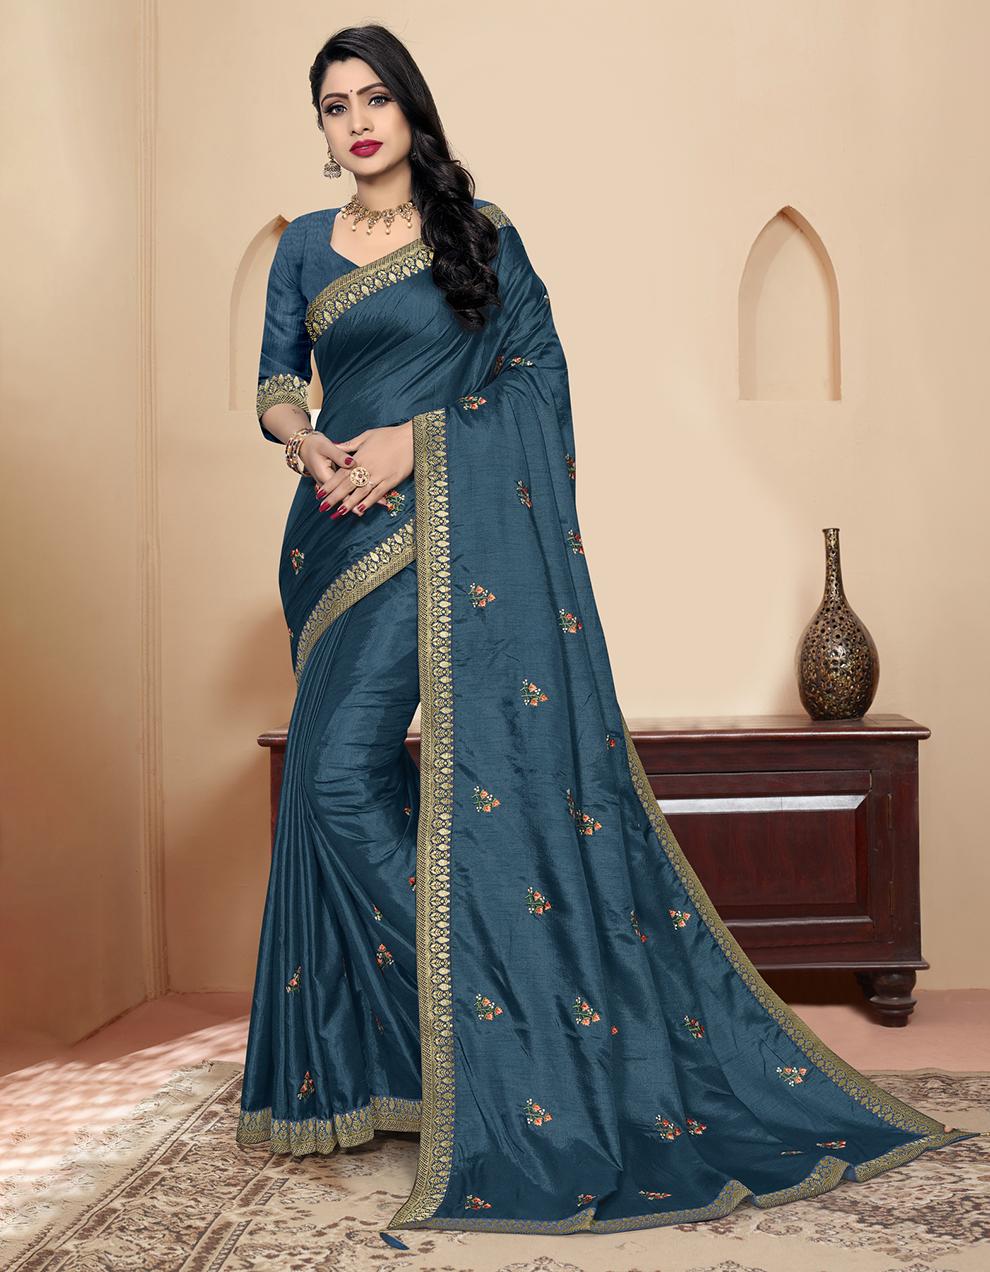 Teal Blue Vichitra Silk Saree With Blouse IW26995